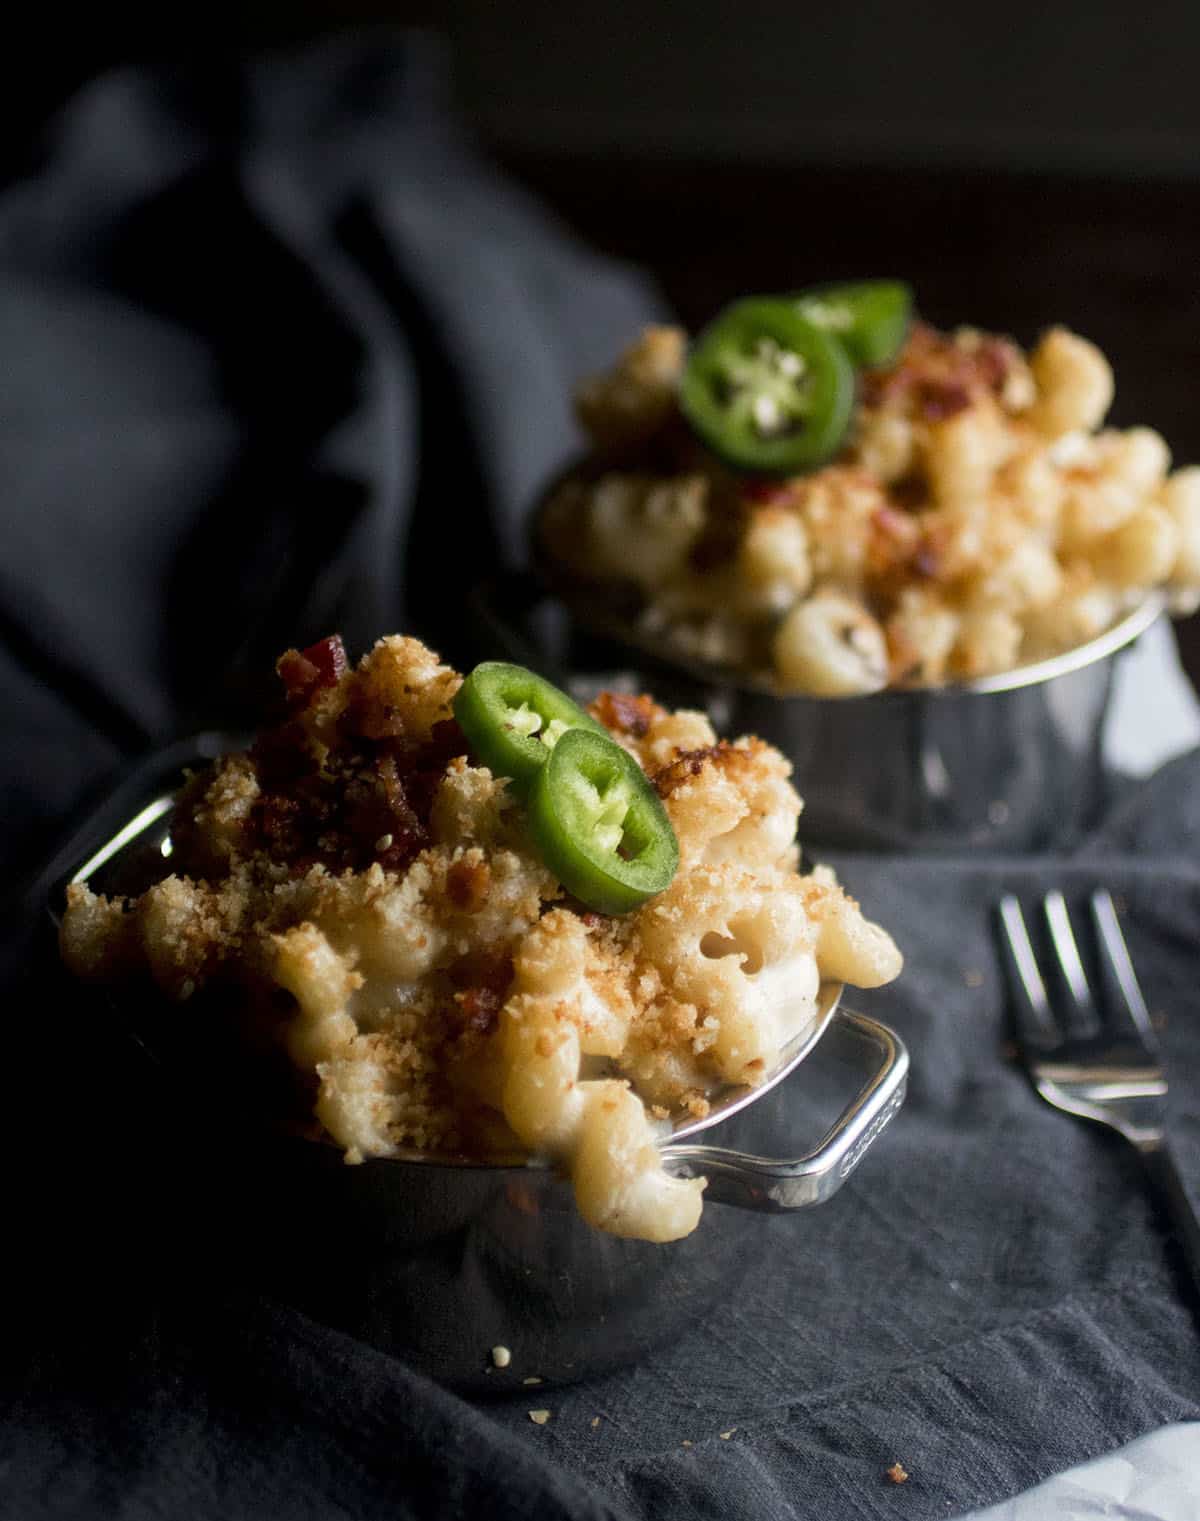 Two small ramekins, filled with mac and cheese and topped with bread crumbs.